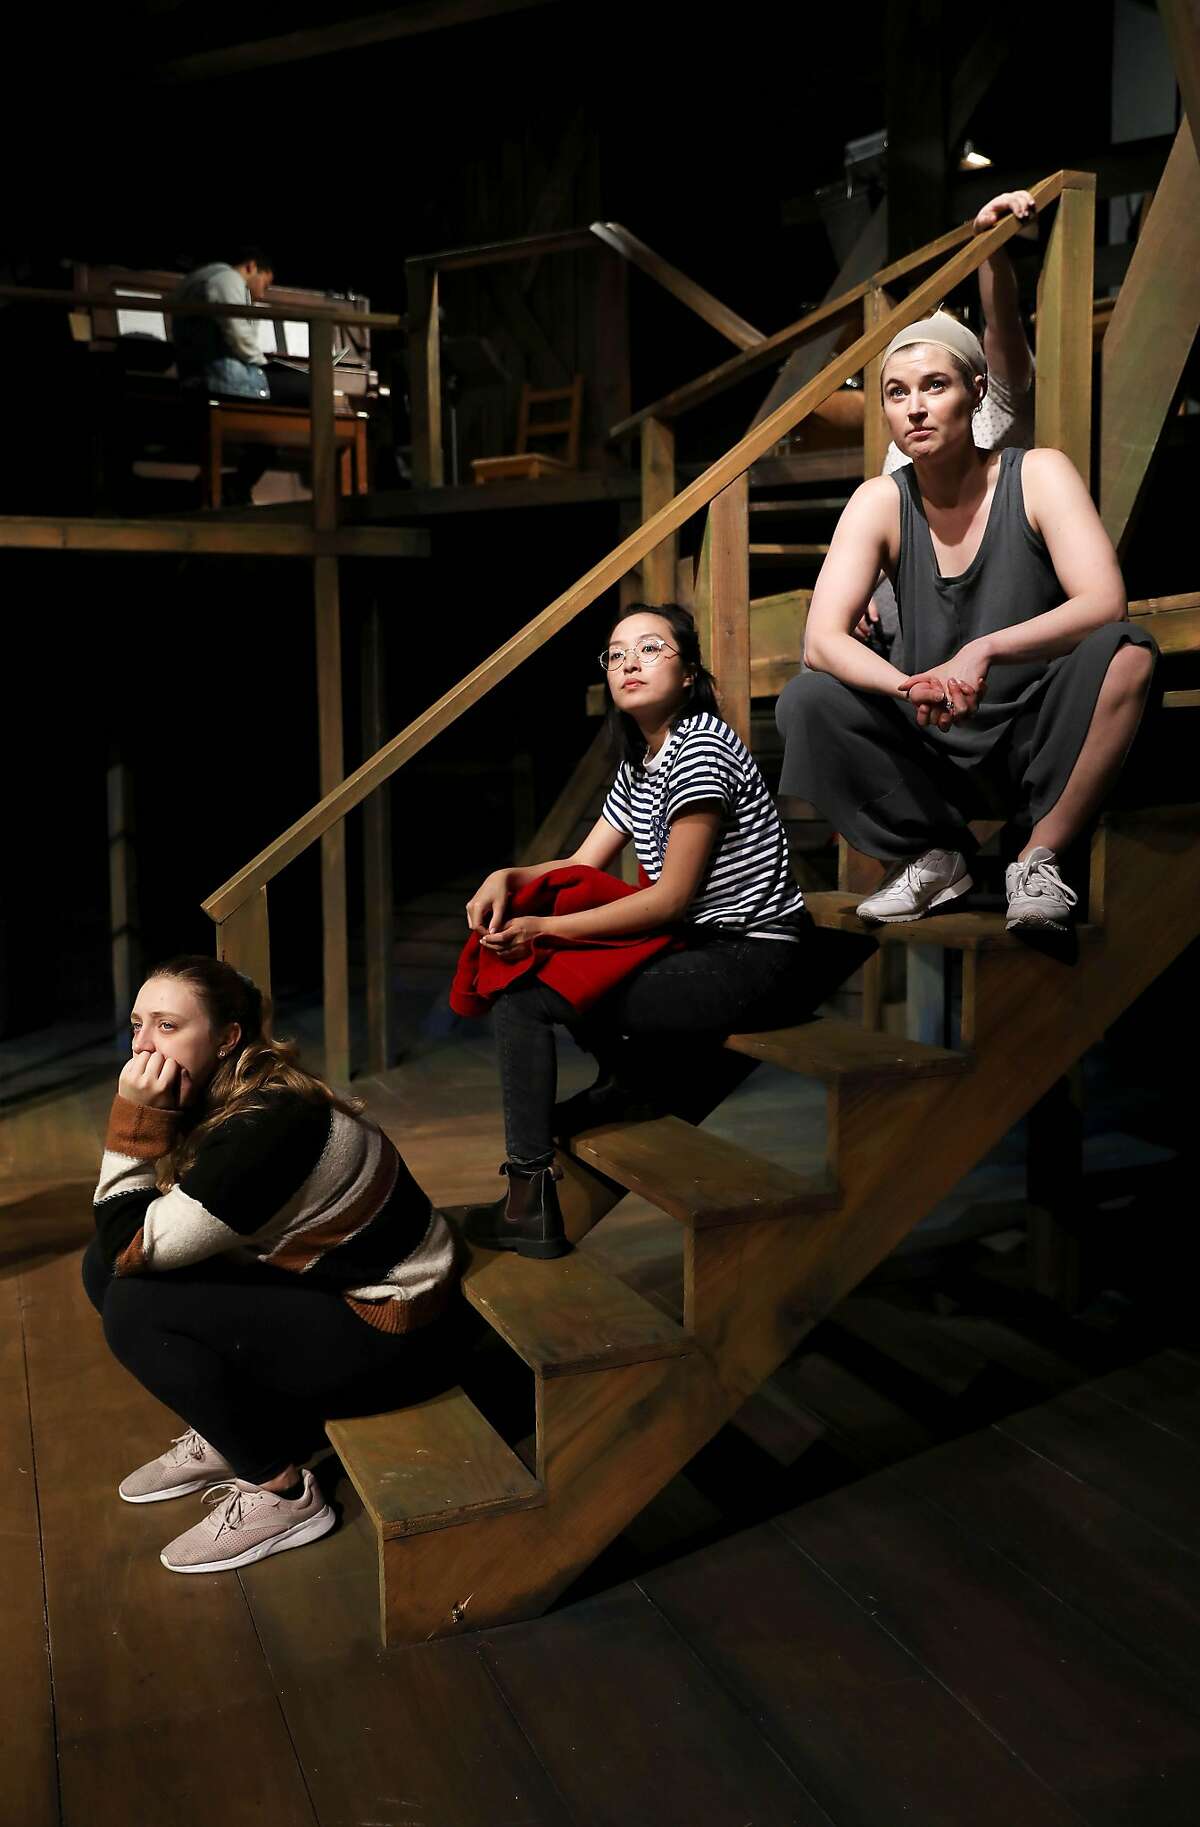 Vinegar Tom cast members Lyndsee Bell, left, Sharon Shao, and Amanda Farbstein listen to instructions during rehearsal at Shotgun Players in Berkeley, Calif., on Wednesday, December 11, 2019. The theater company reclassified actors, stage managers, set building, lighting team as employees a few year ago after a state audit, and is raising money for a fund to cover the extra expenses of doing so.